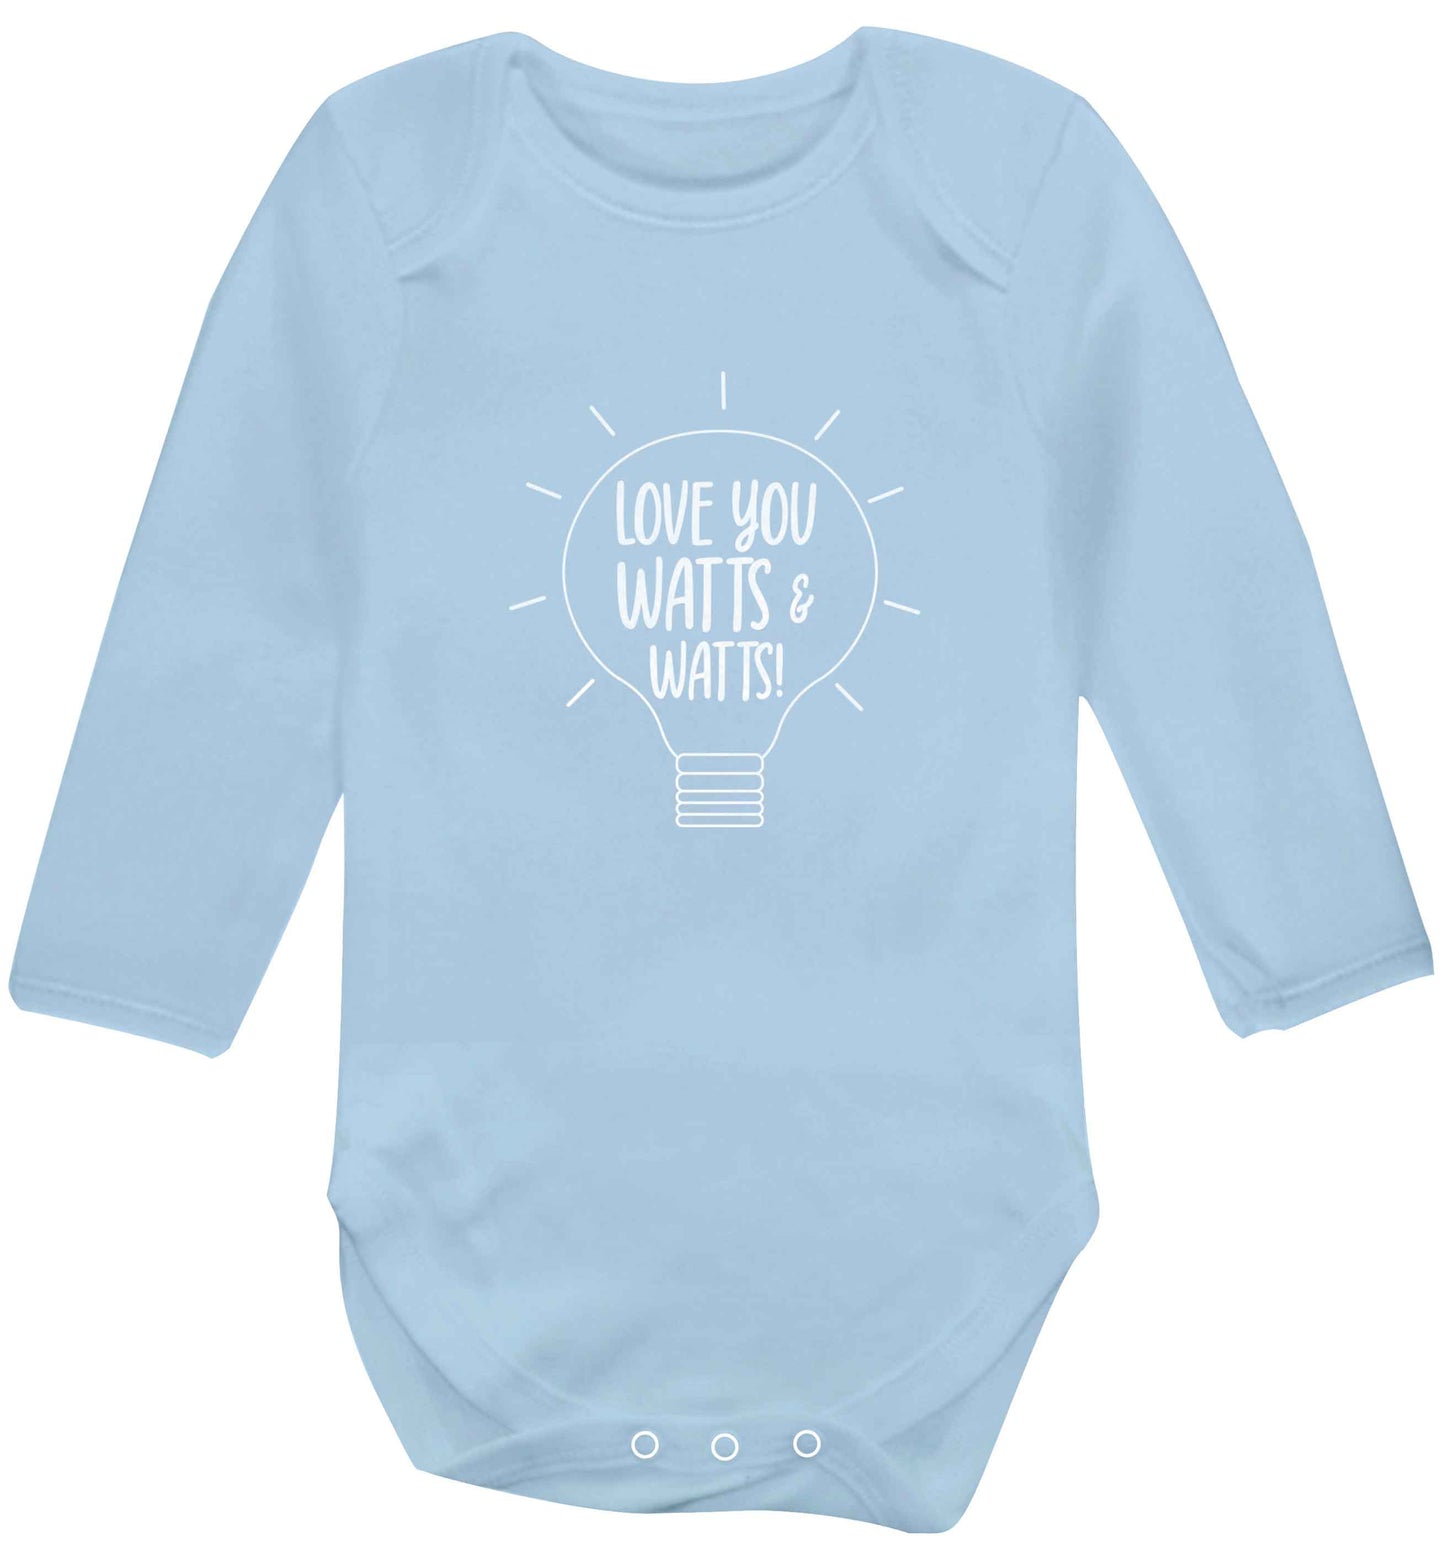 I love you watts and watts baby vest long sleeved pale blue 6-12 months